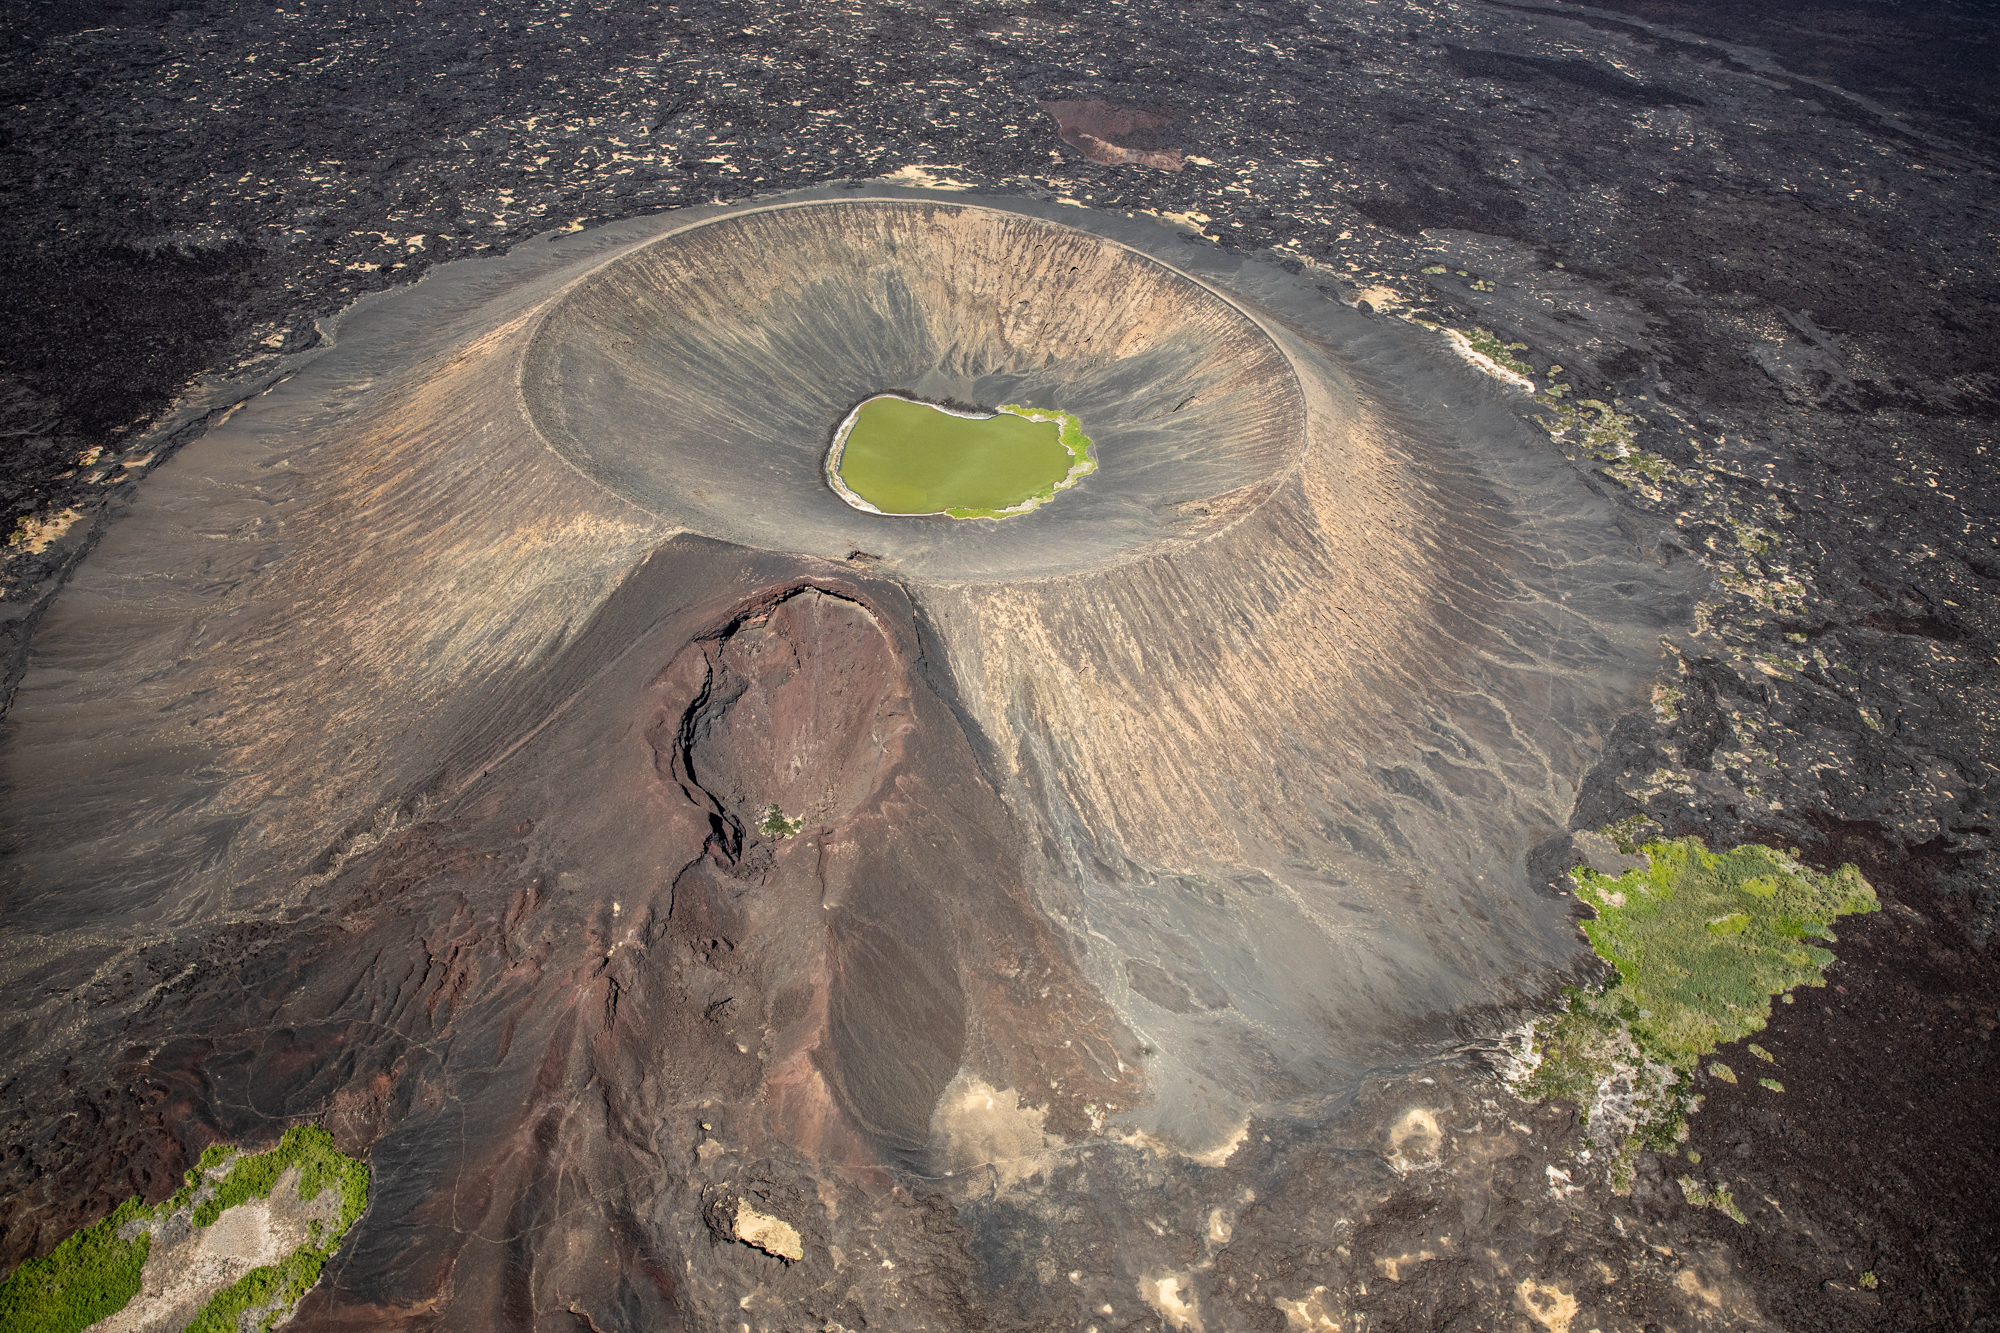   Volcanic Crater, Danakil Depression, Ethiopia  - One of the hottest, driest and lowest places on earth, the Danakil Depression is part of the Great Rift Valley.  The Afar people have adapted to living in it’s extreme conditions.  